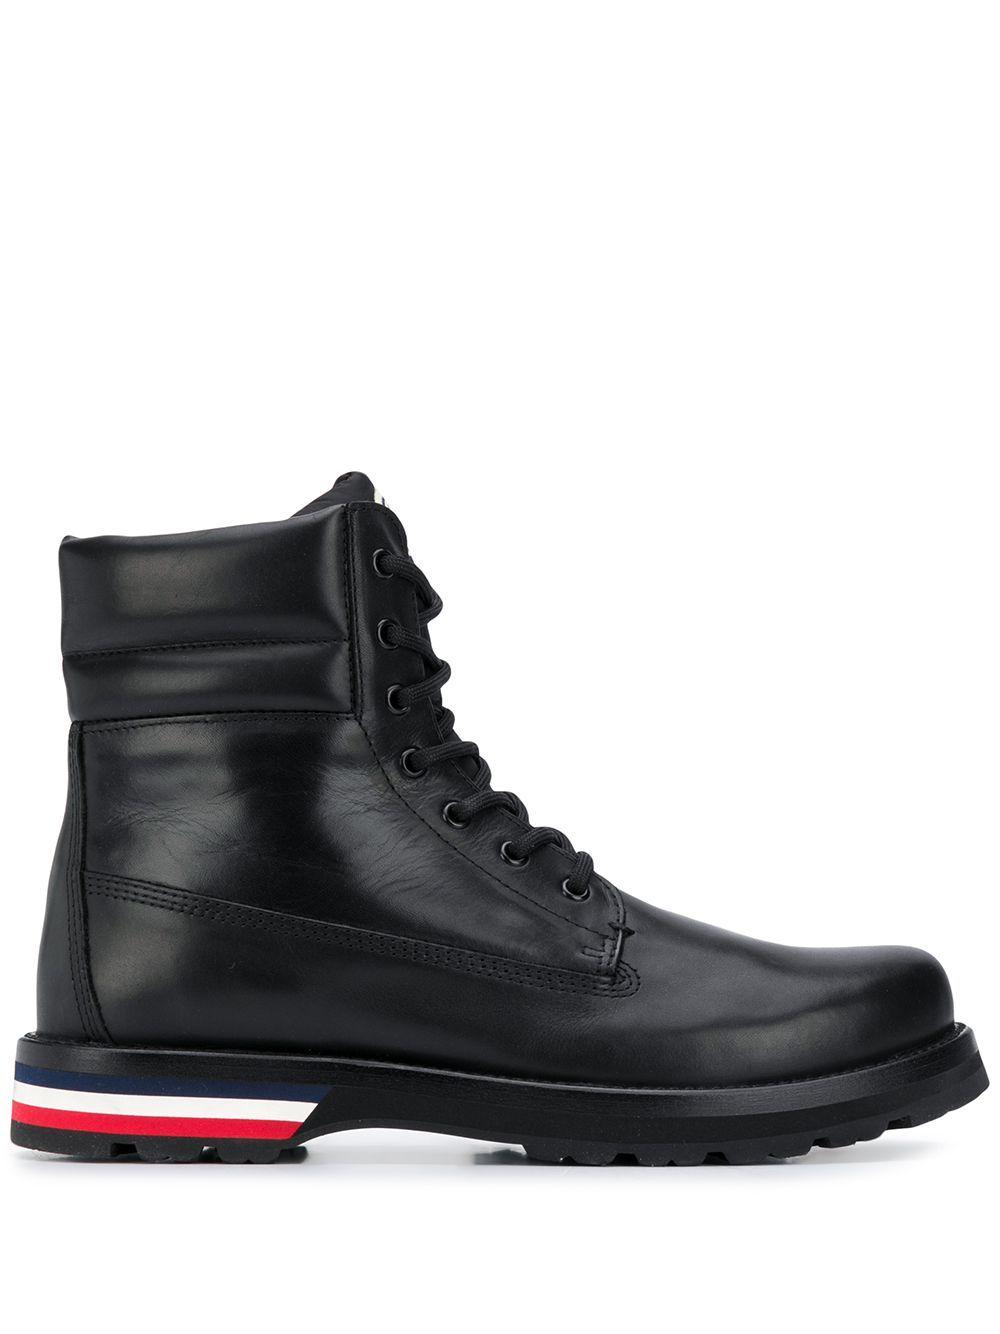 Moncler Leather Ankle Boots in Black for Men - Lyst